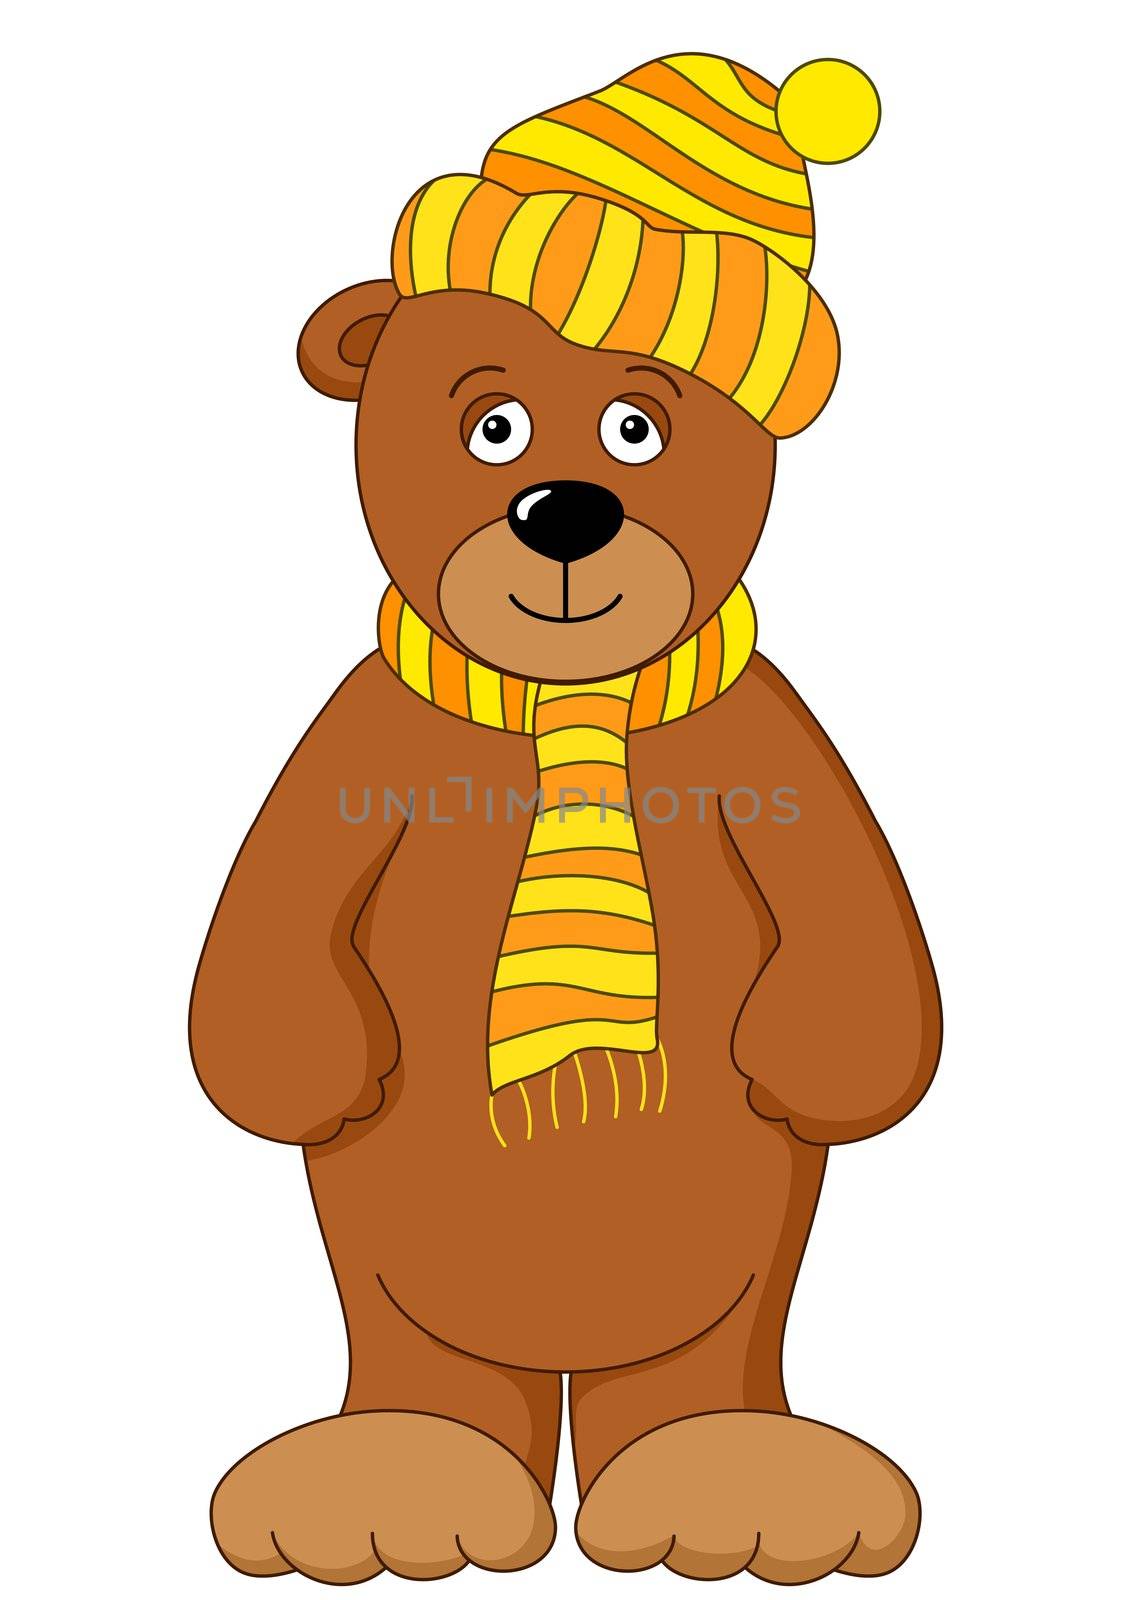 Teddy bear in cap and scarf by alexcoolok